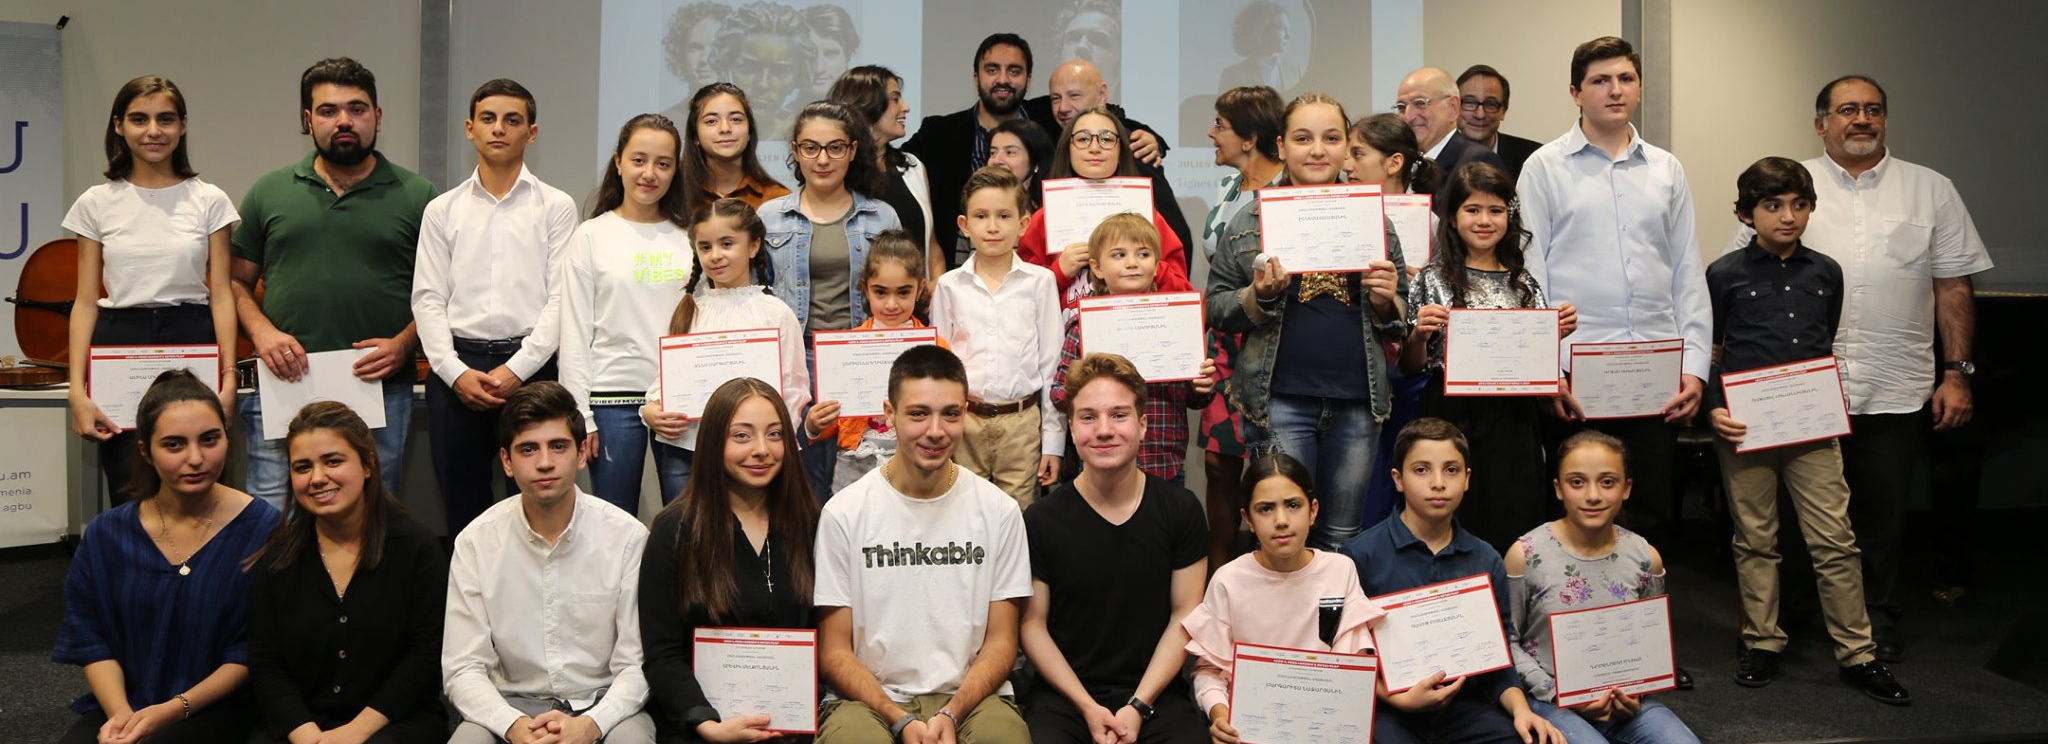 AGBU France supports AGBU Discovers Talents Programme in Armenia and lends Instruments to Promising Young Musicians